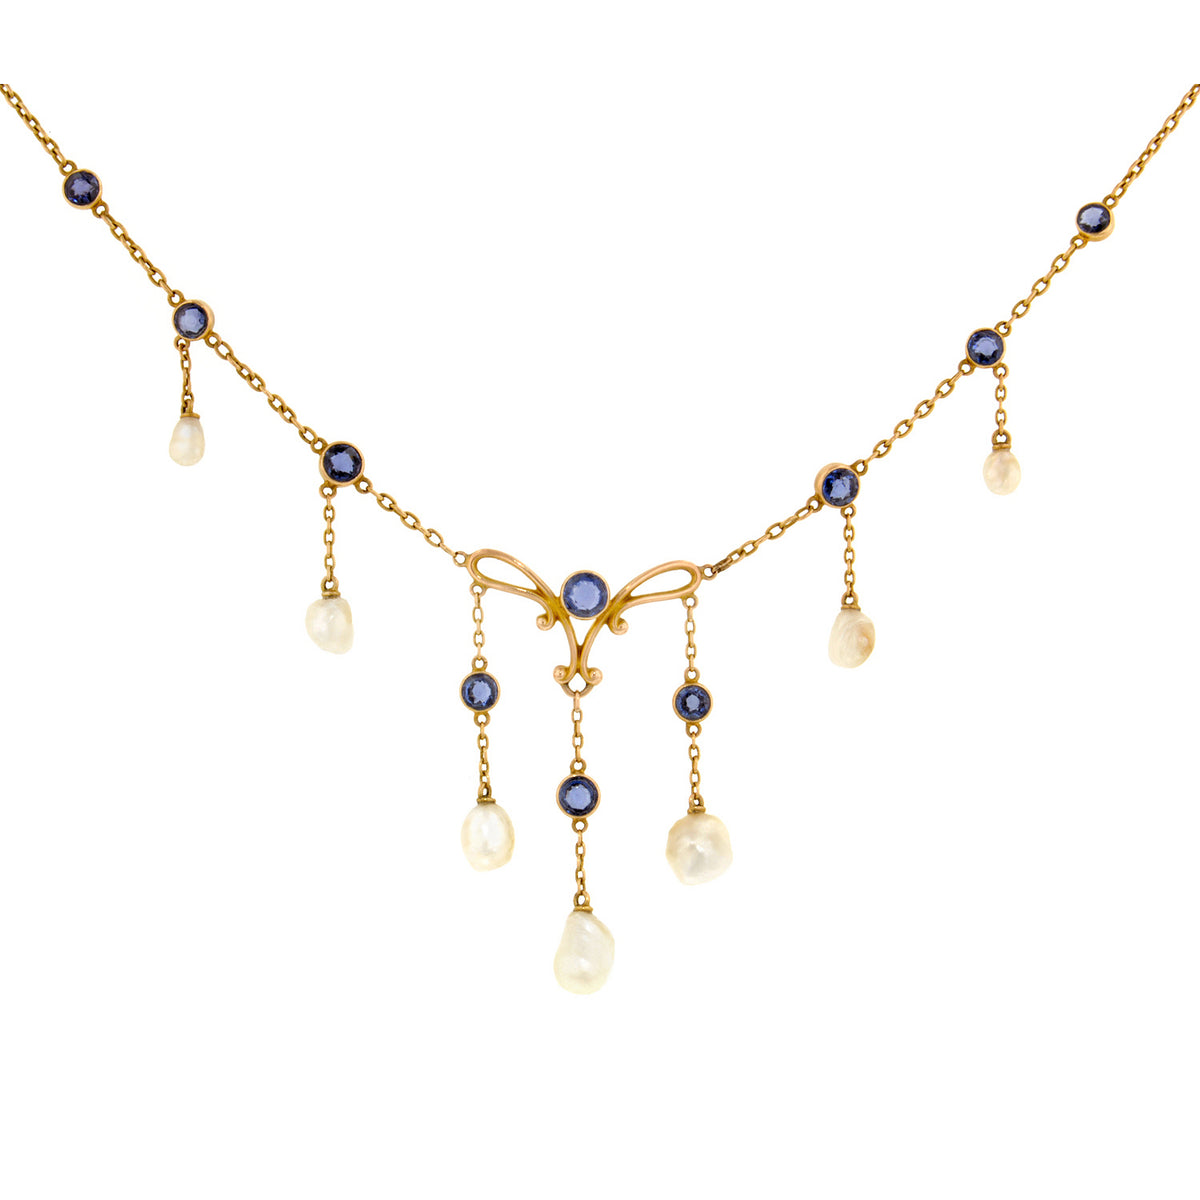 Edwardian Sapphire & Pearl Necklace